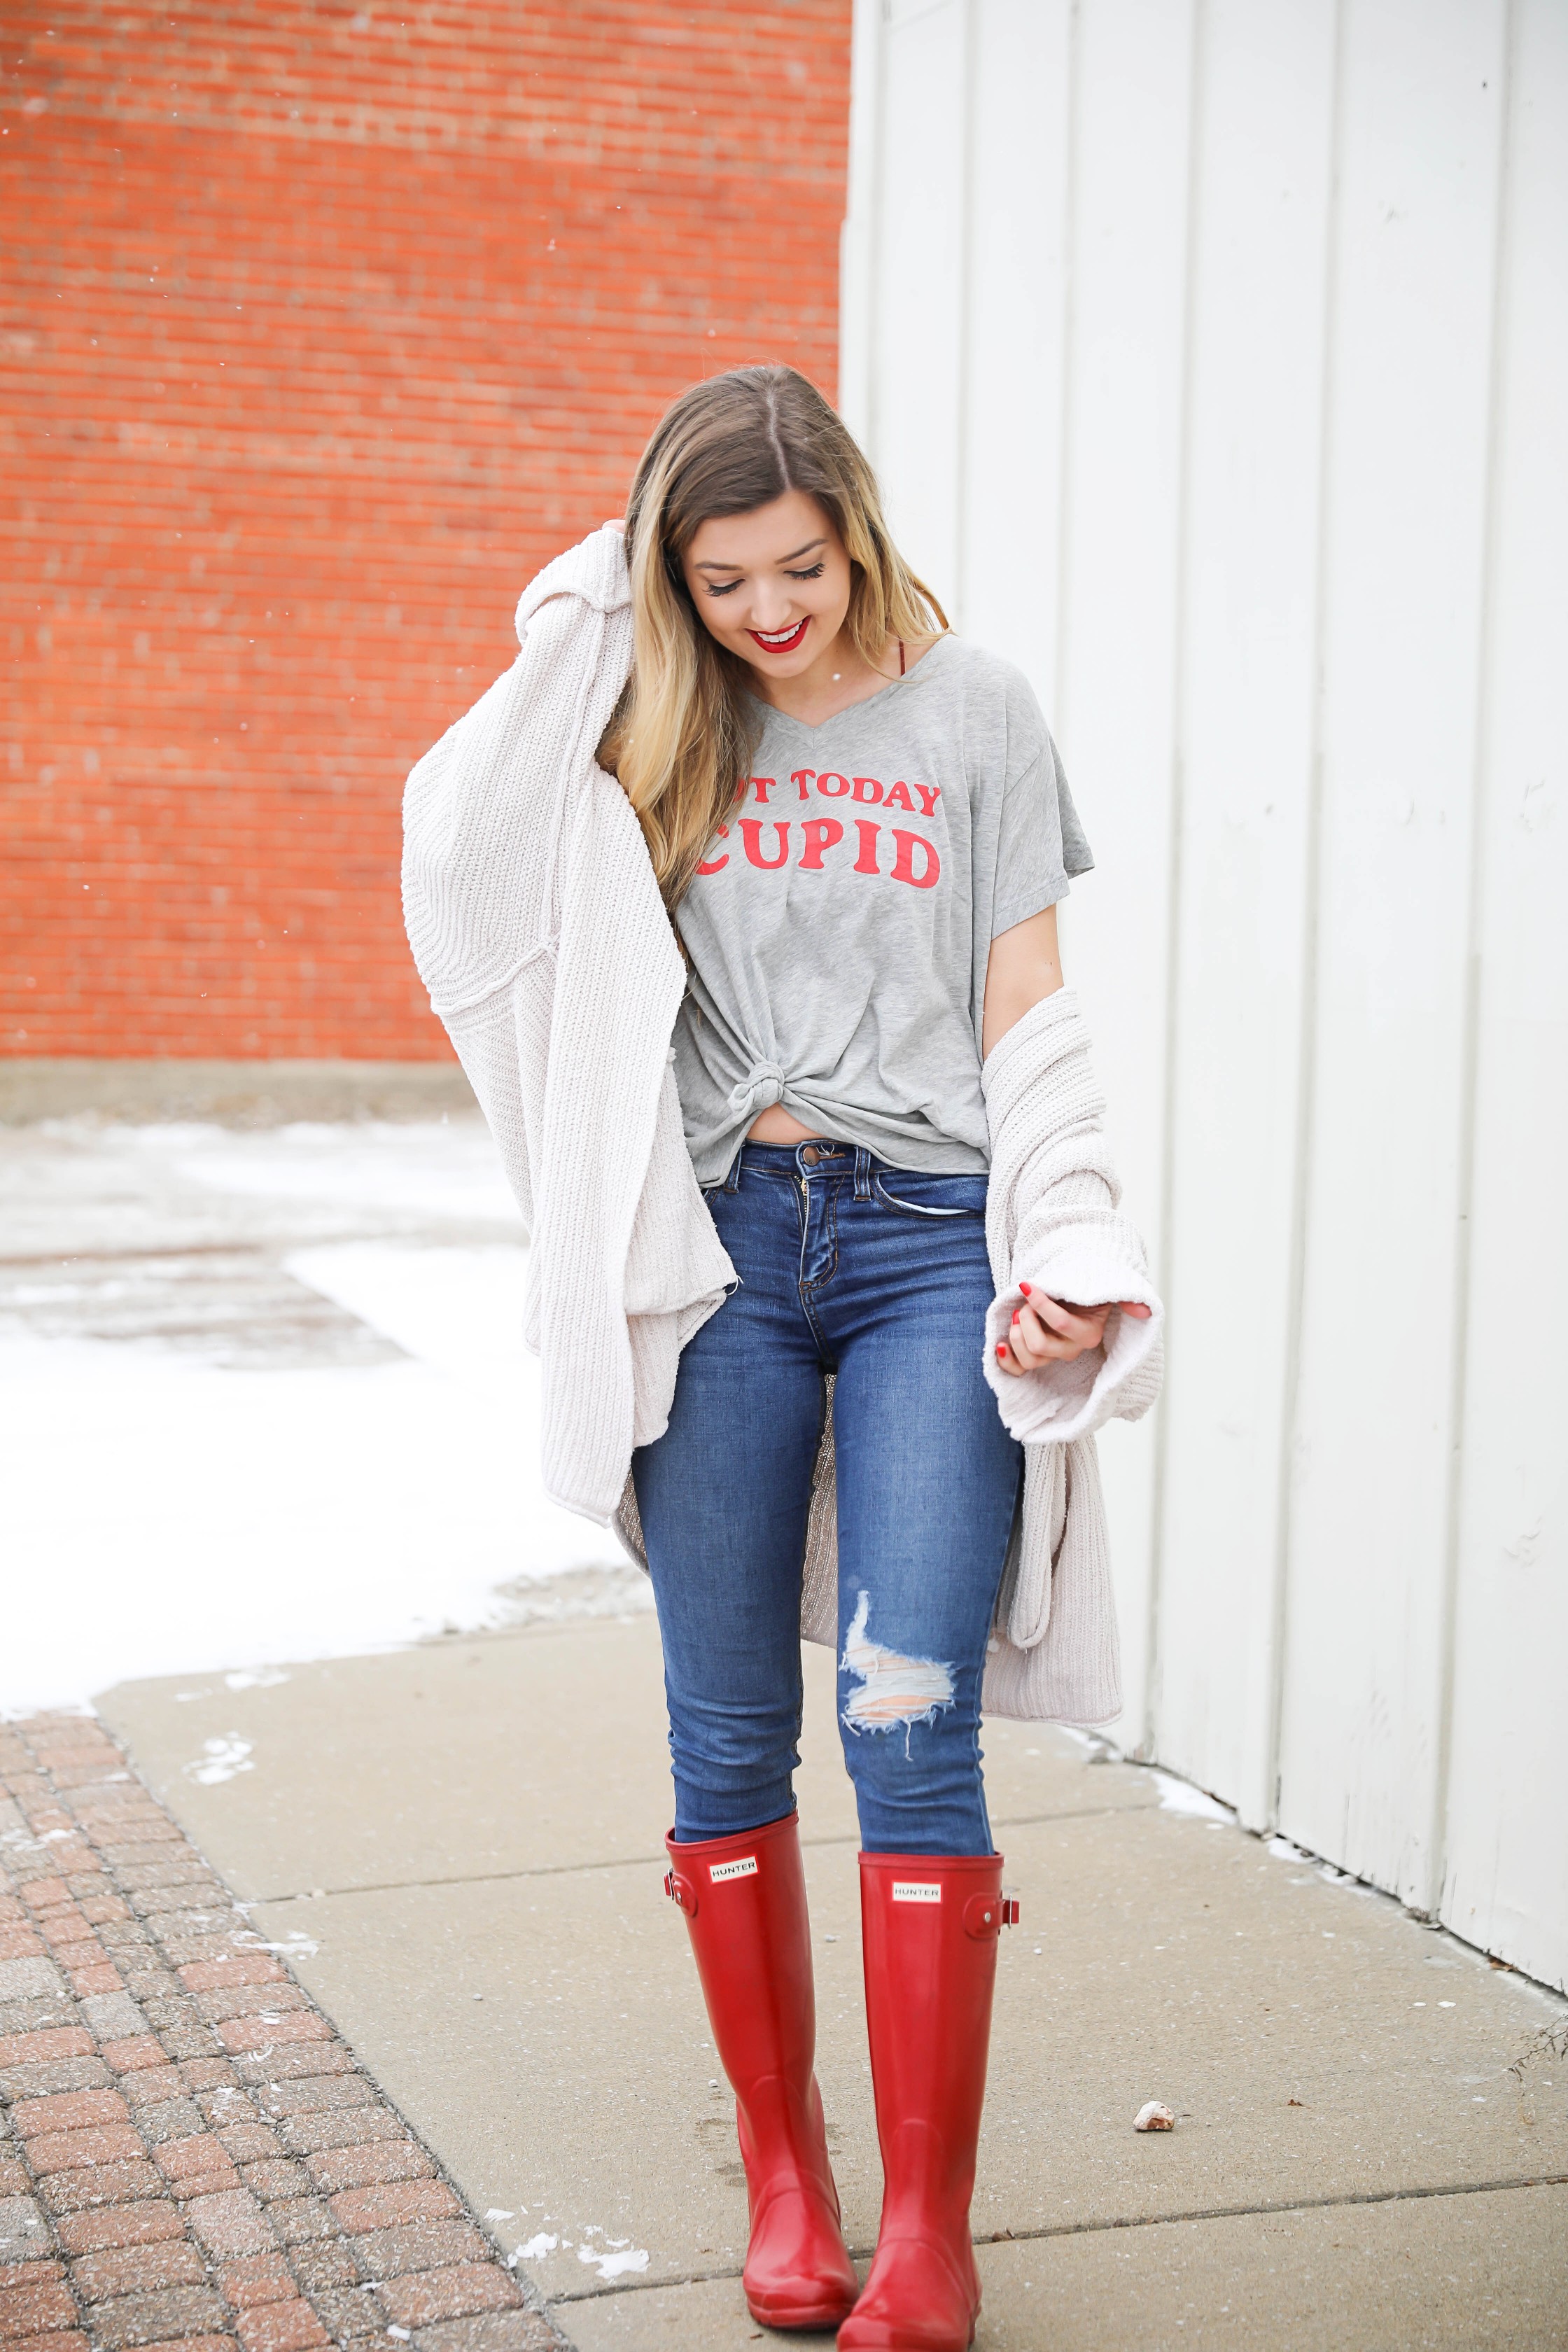 Not today cupid valentine's day tee! Single tee for Valentine's Day. I love this funny valentine's day shirt with free people low tide cardigan over it! I paired it with my red glossy hunter boots! Details on daily dose of charm by lauren lindmark